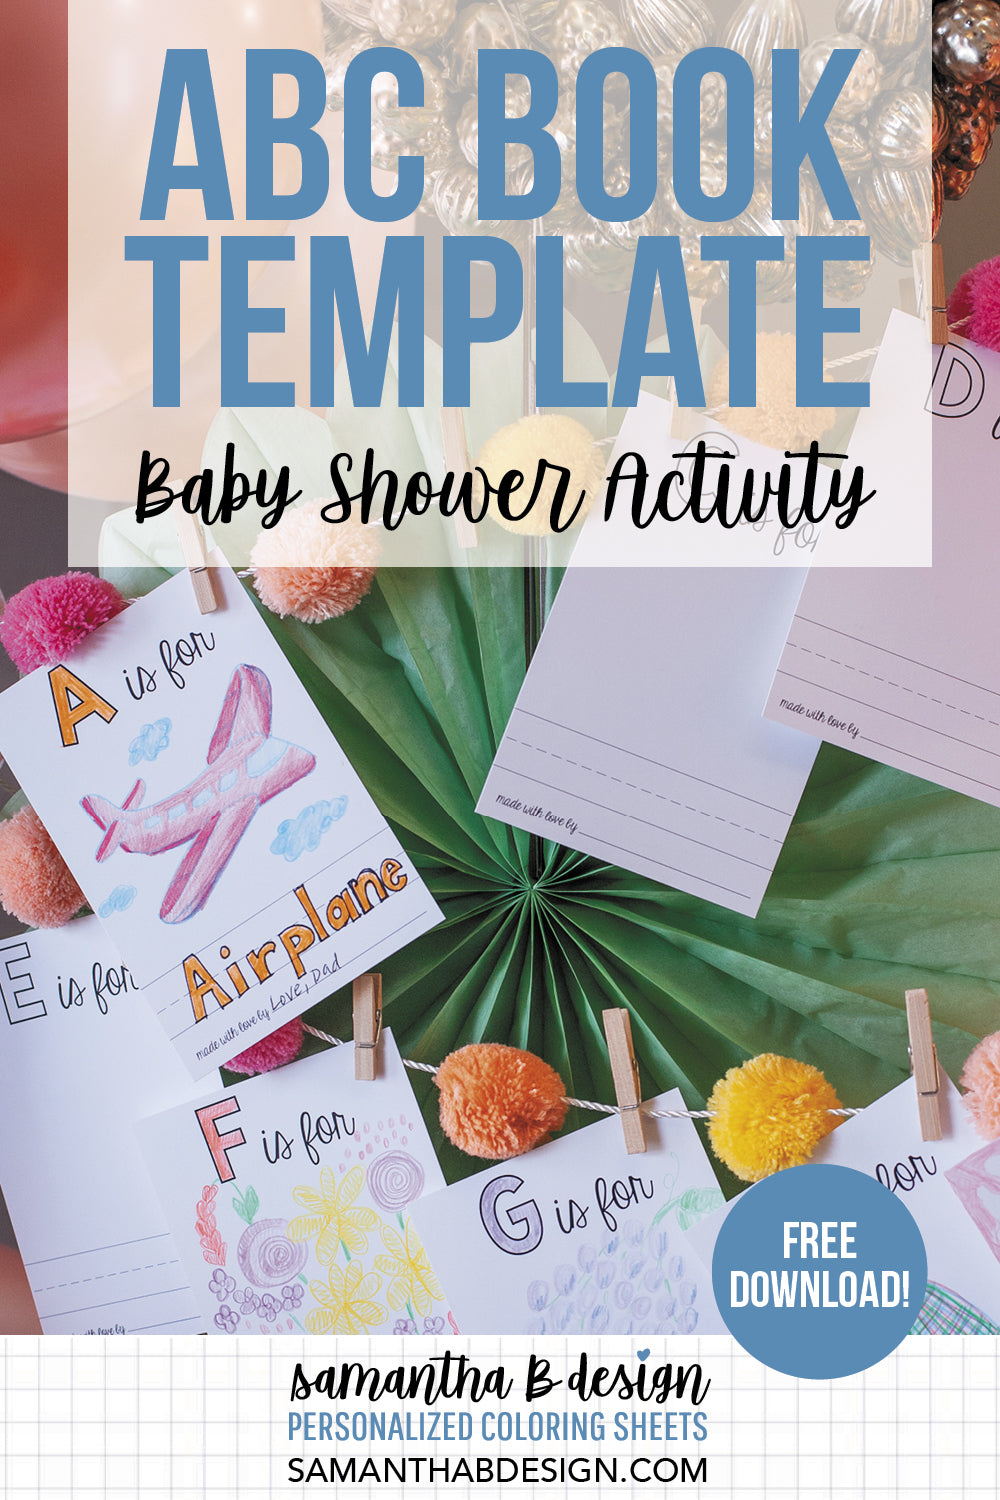 free-printable-abc-book-template-for-baby-shower-activity-samantha-b